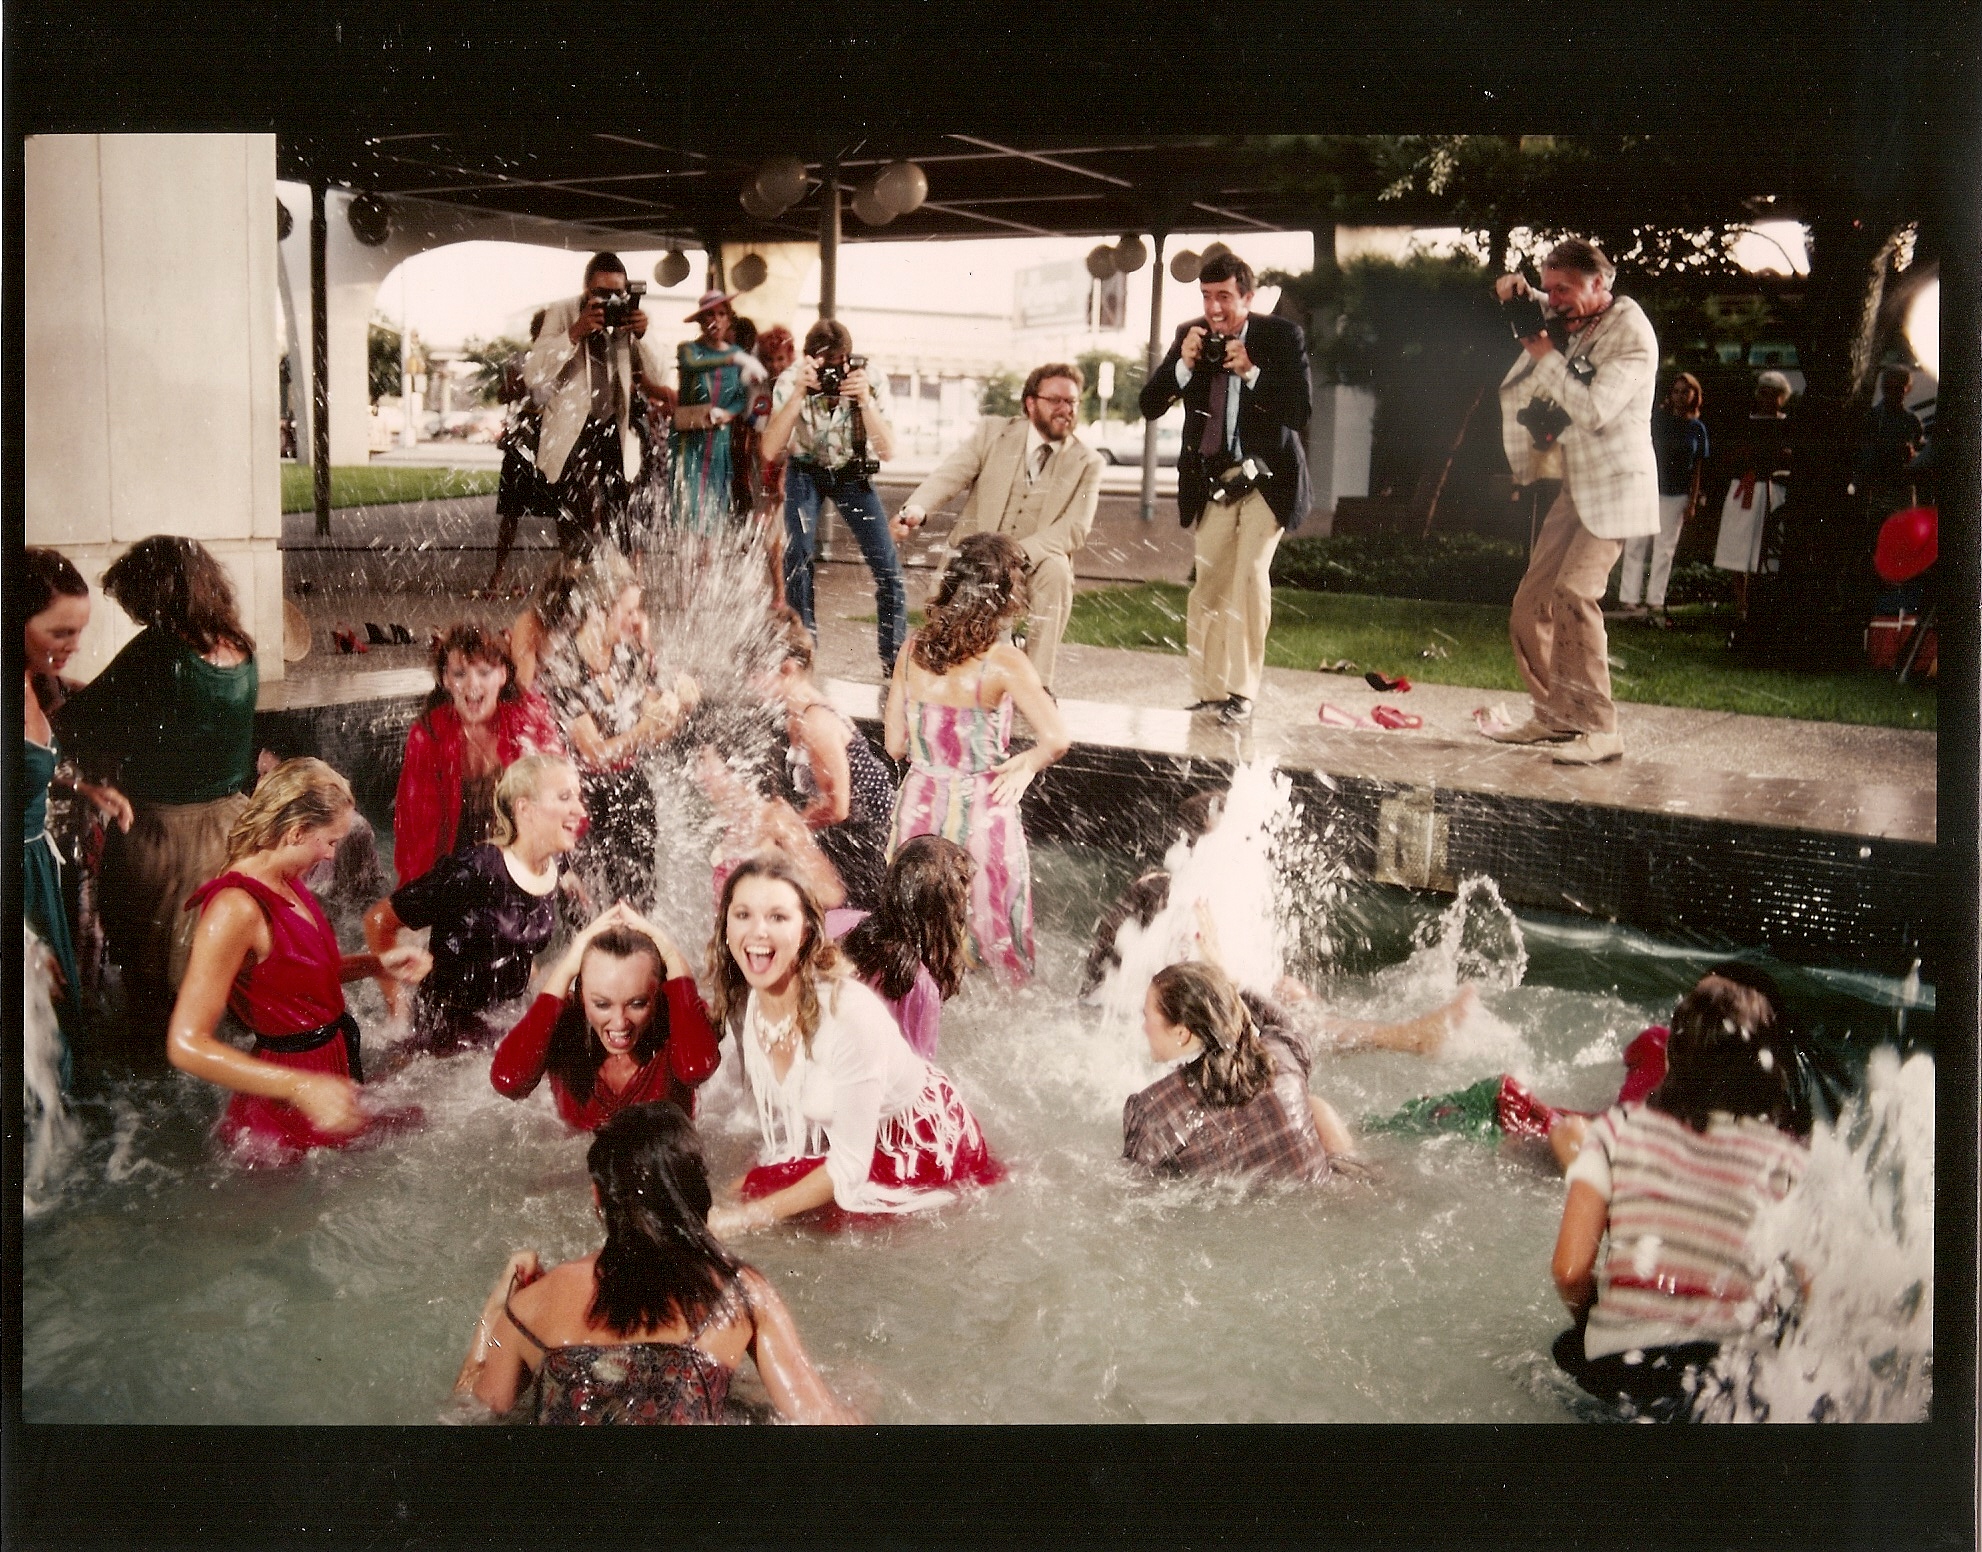 shooting the jumping in the fountain scene for Miss All American Beauty